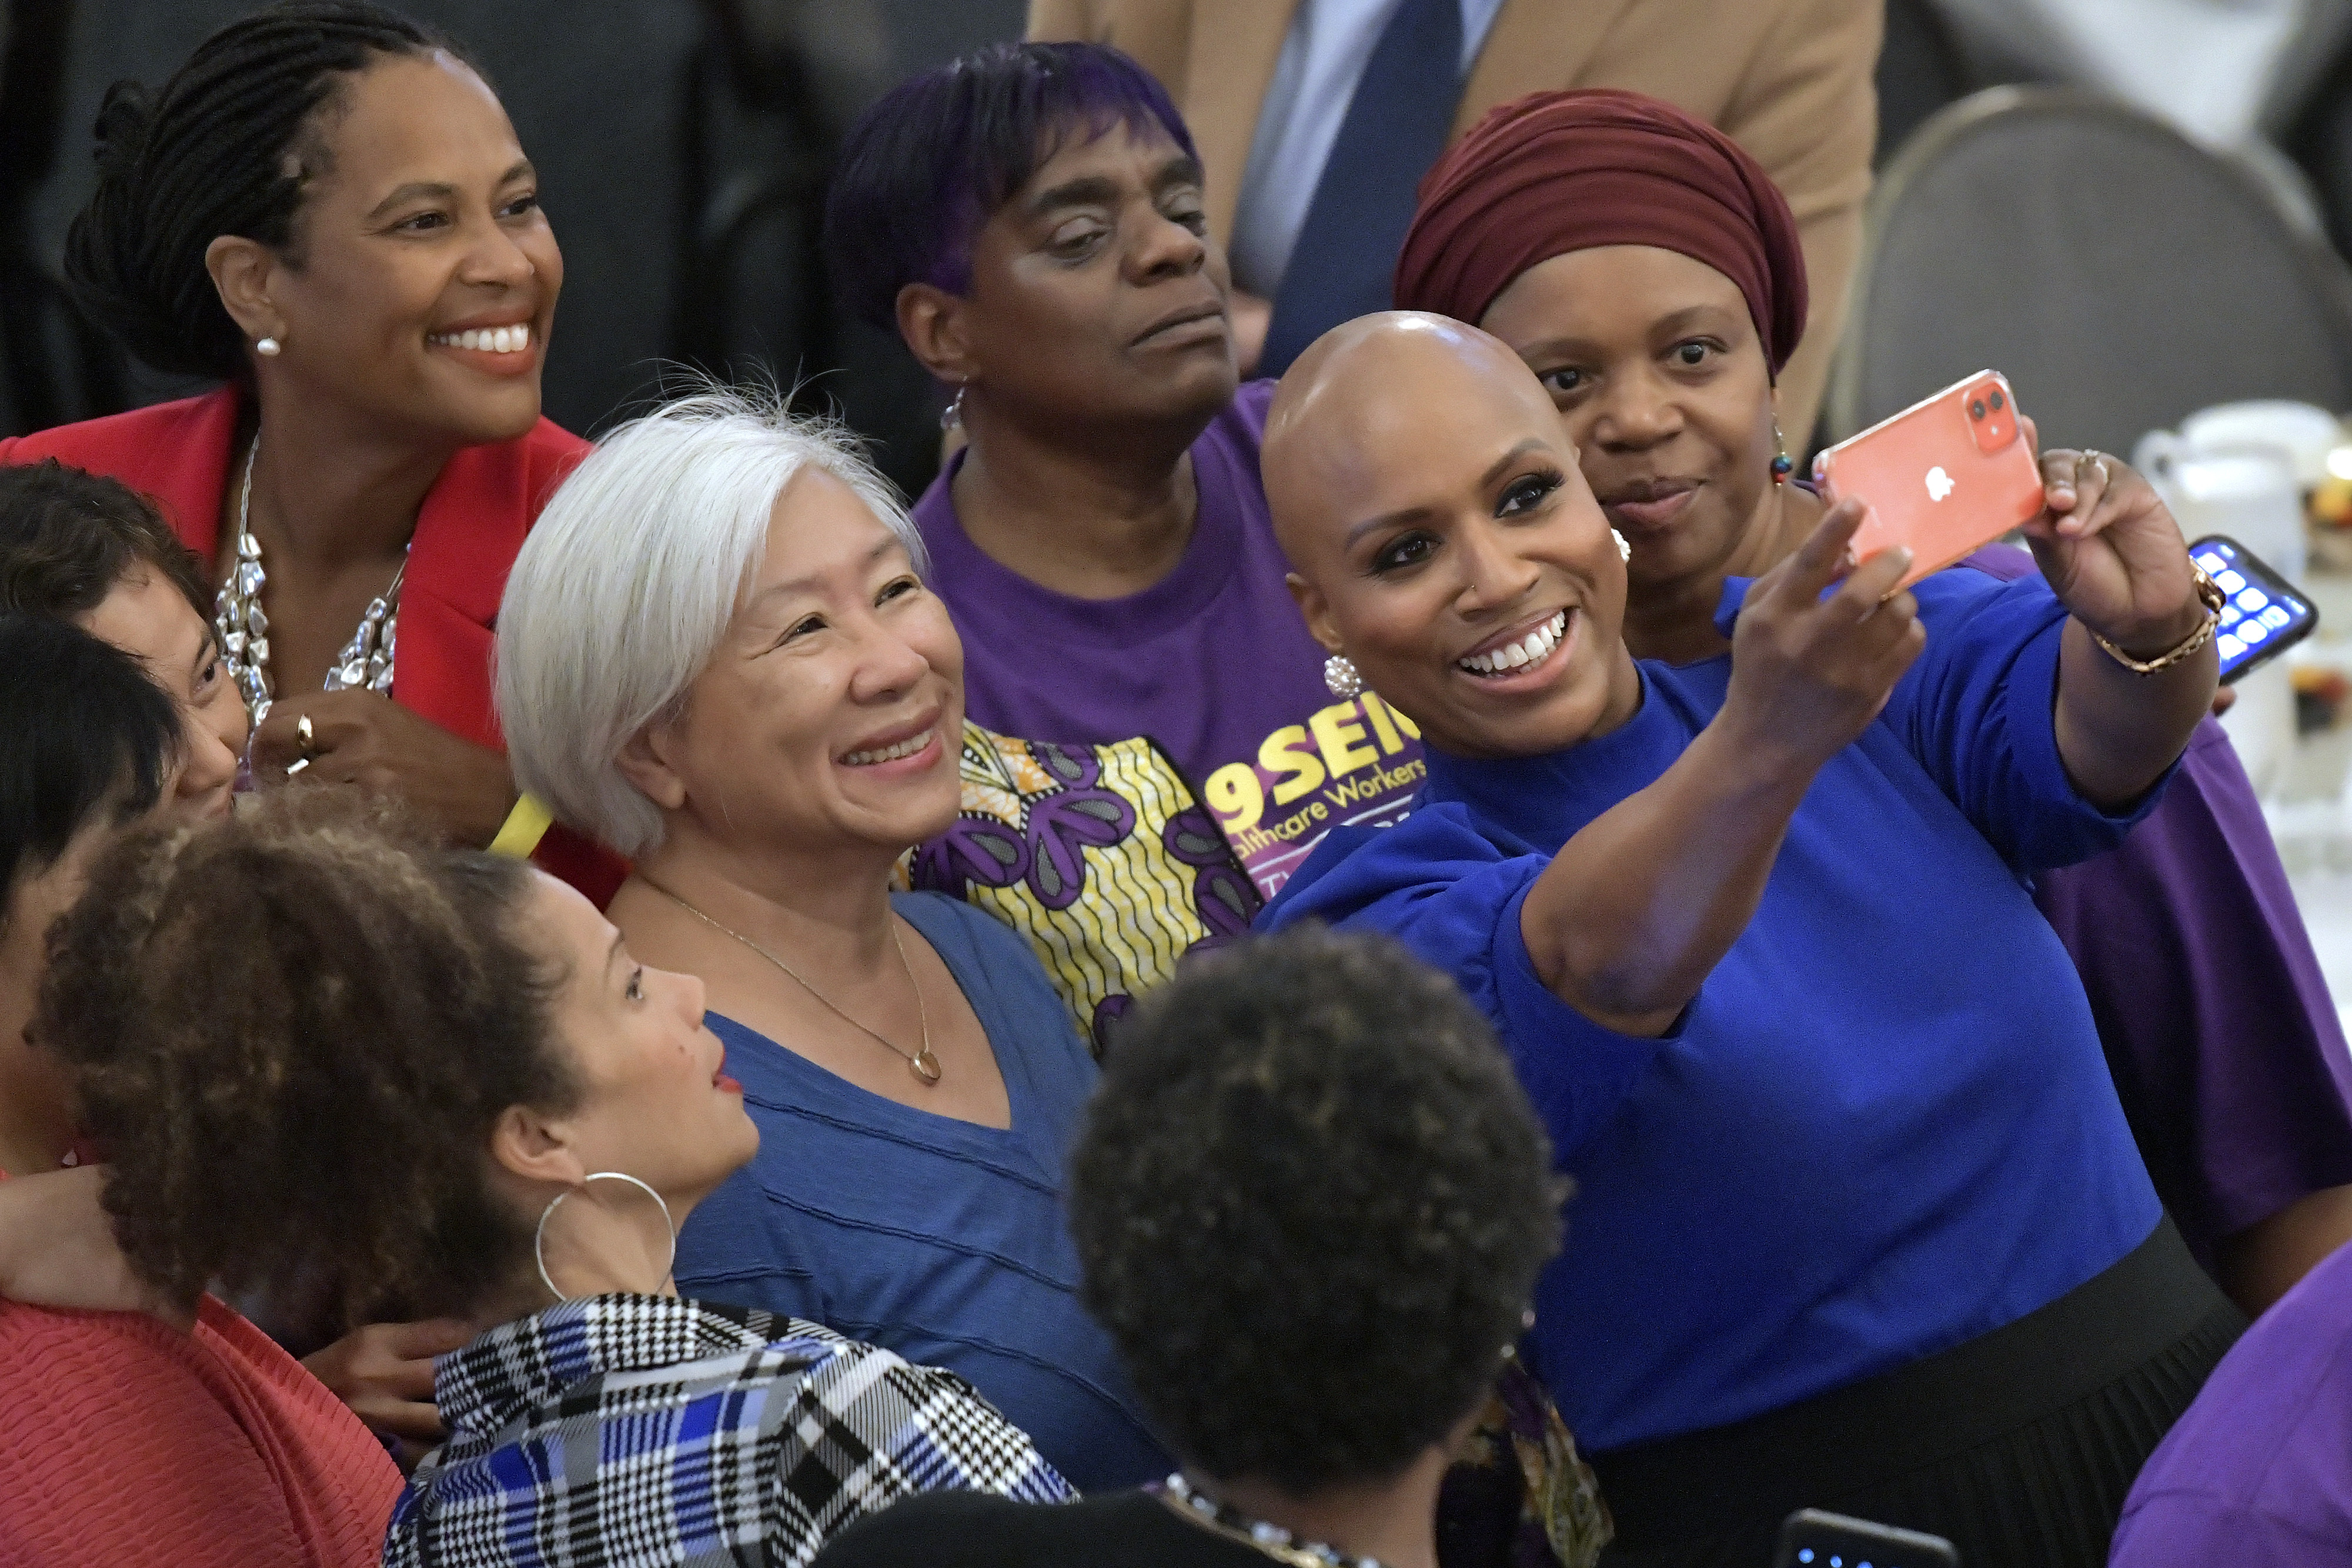 Rep. Ayanna Pressley (D-MA) takes a photo with supporters at the Annual Greater Boston Labor Council Breakfast on Monday, Labor Day, Sept. 5, 2022 at the Park Plaza Hotel in Boston. (AP Photo/Josh Reynolds)